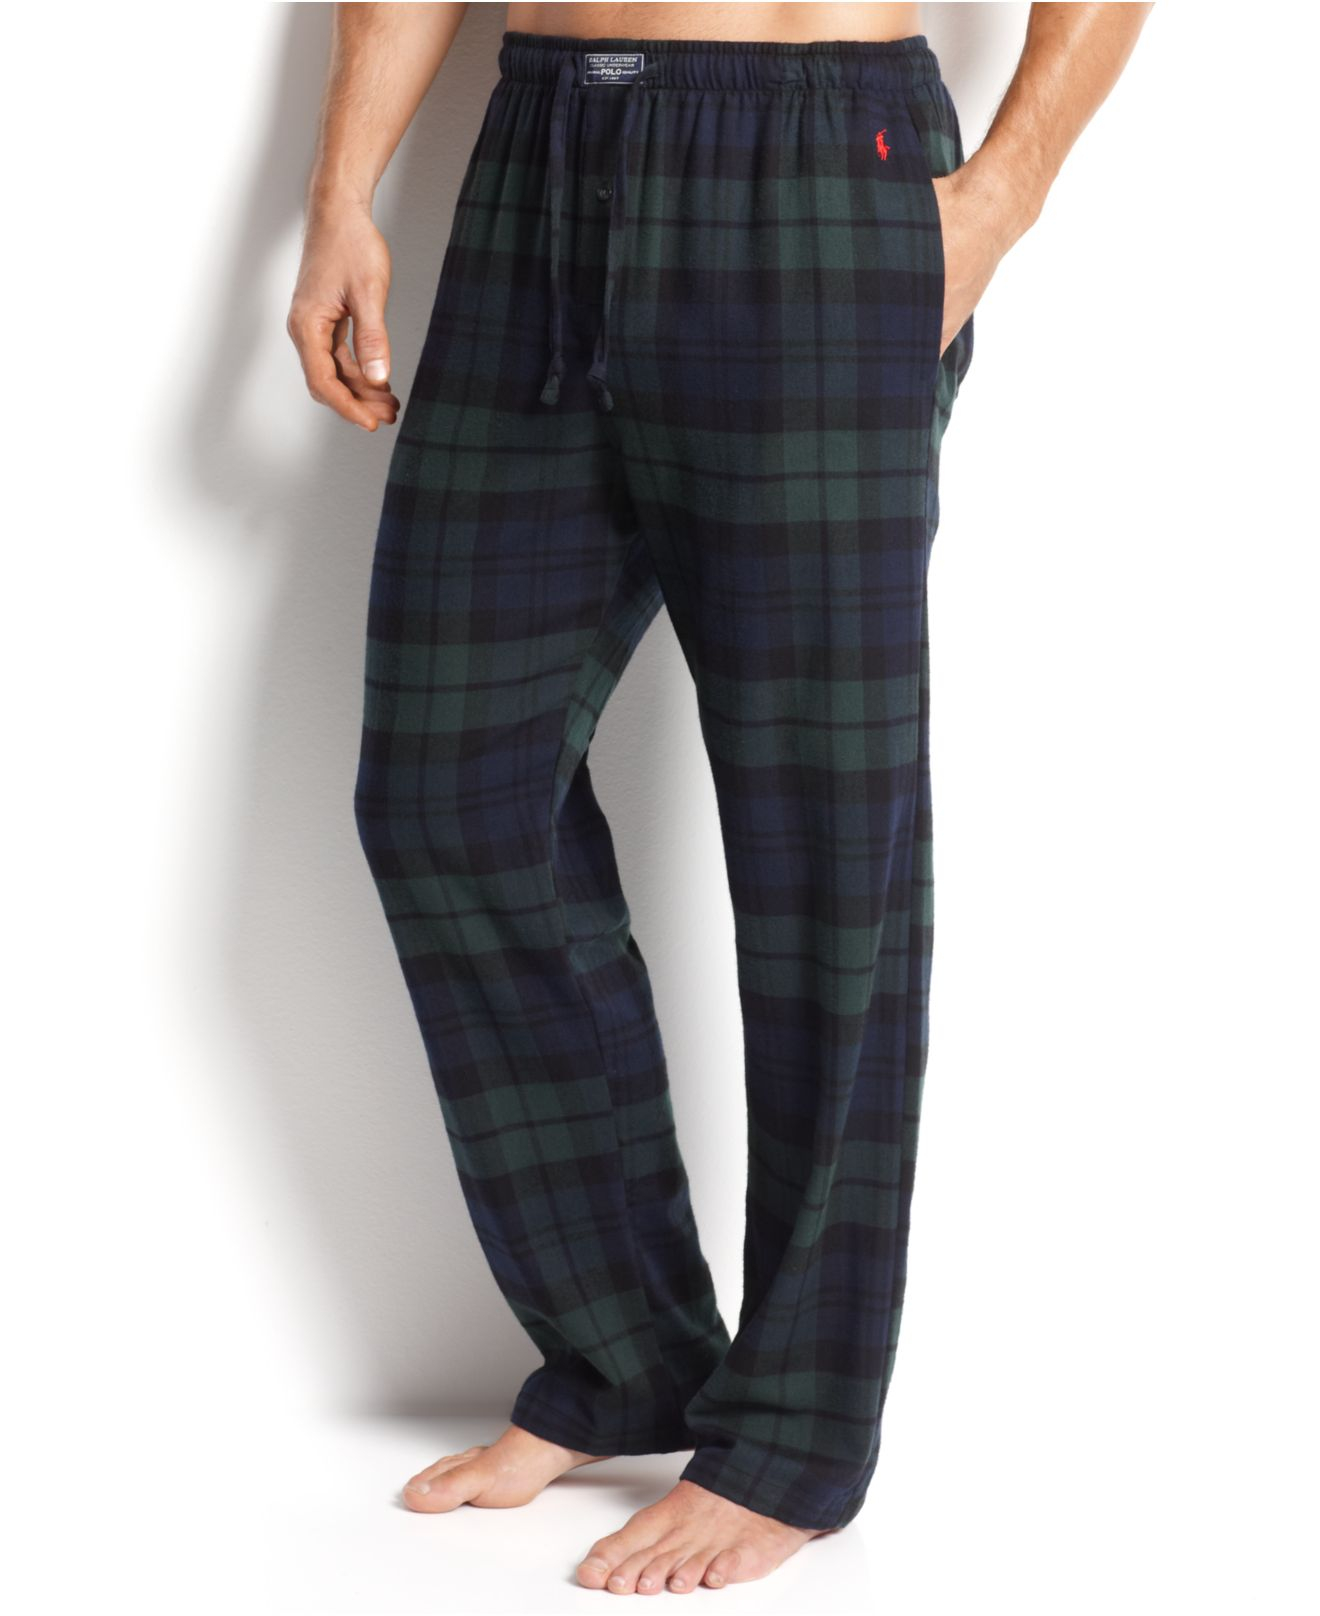 Polo Ralph Lauren Big And Tall Flannel Pajama Pants in Black for Men - Lyst